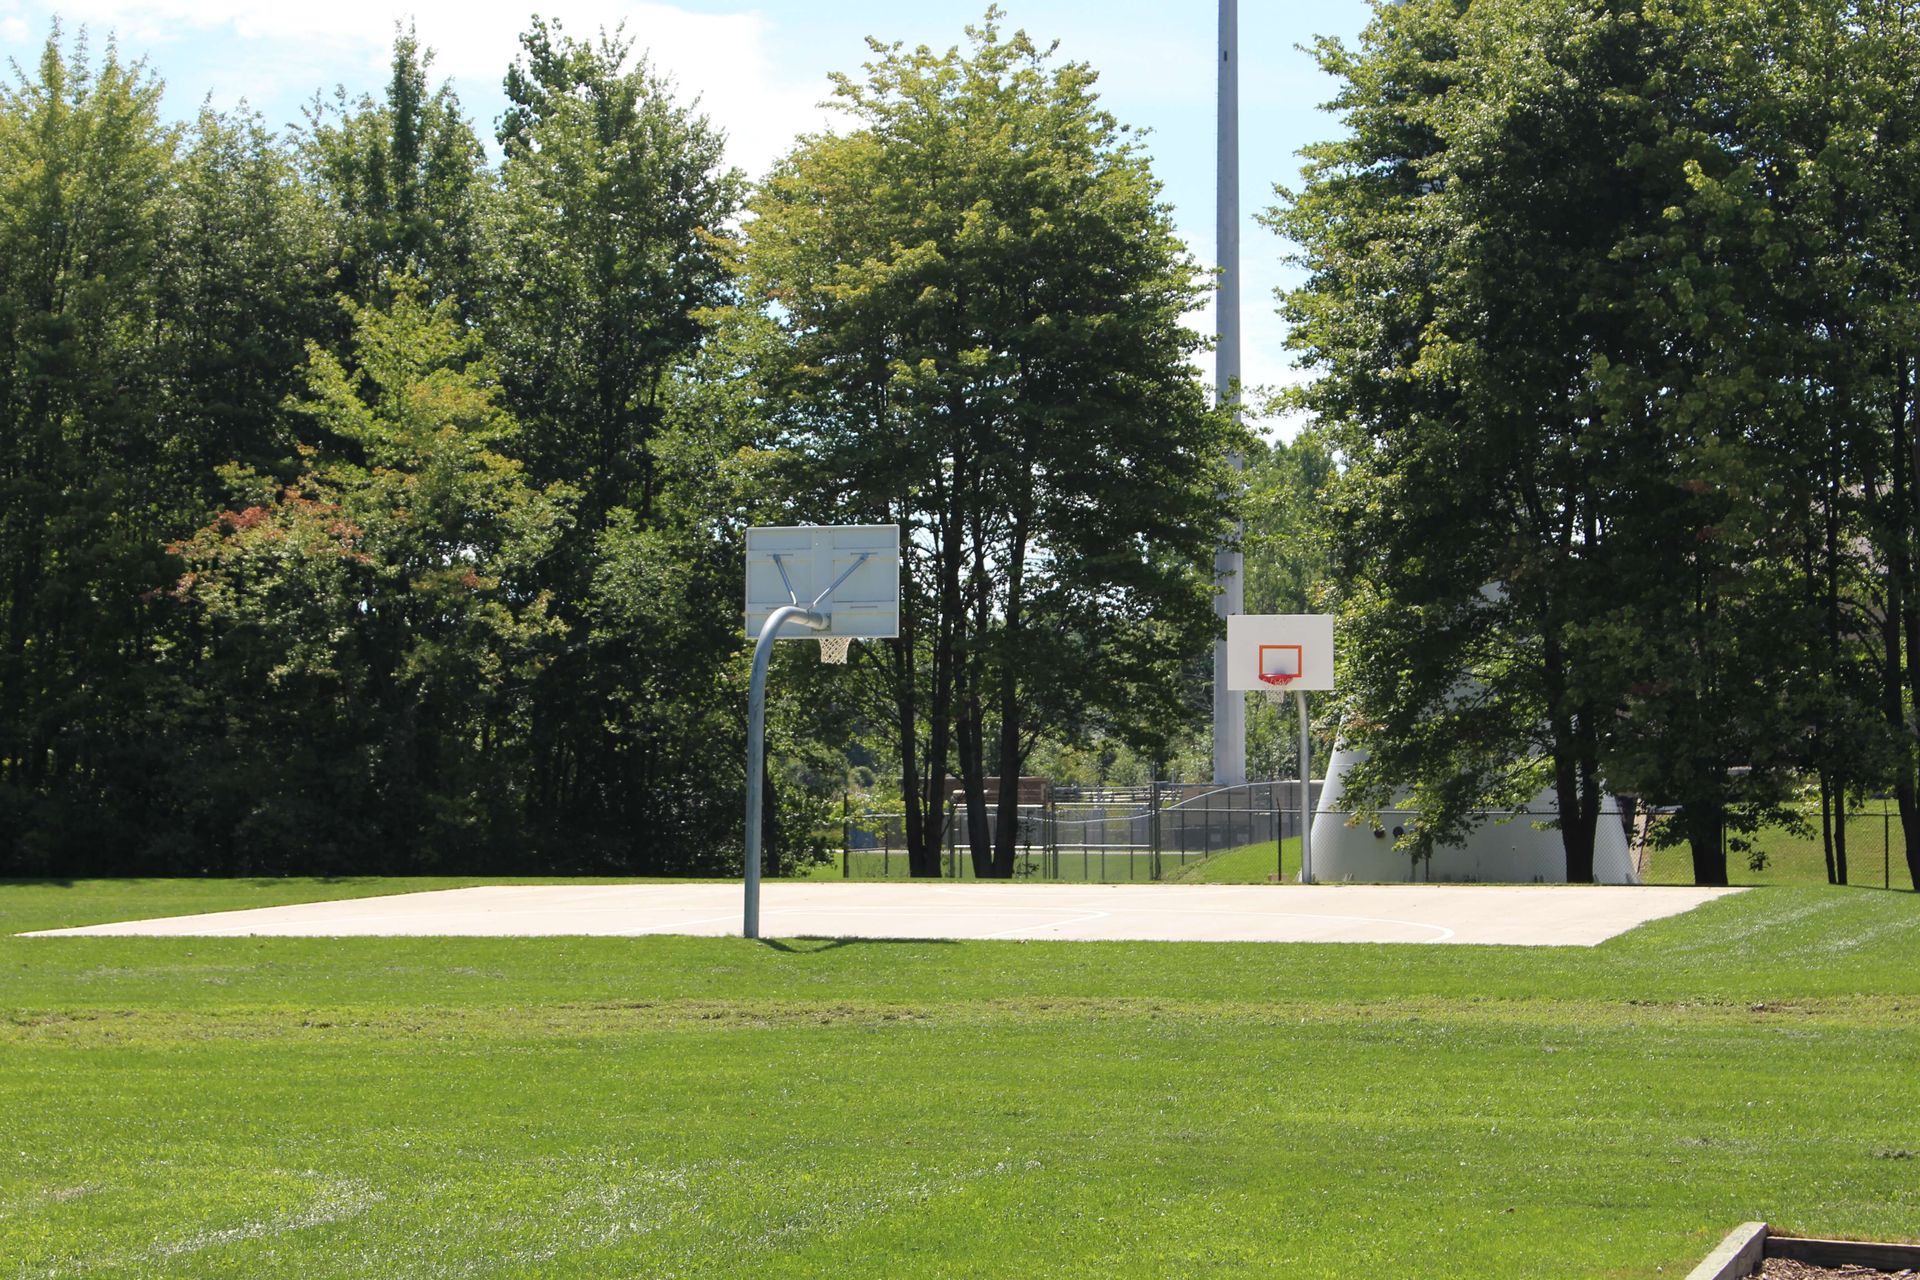 A basketball court in a park with trees in the background.